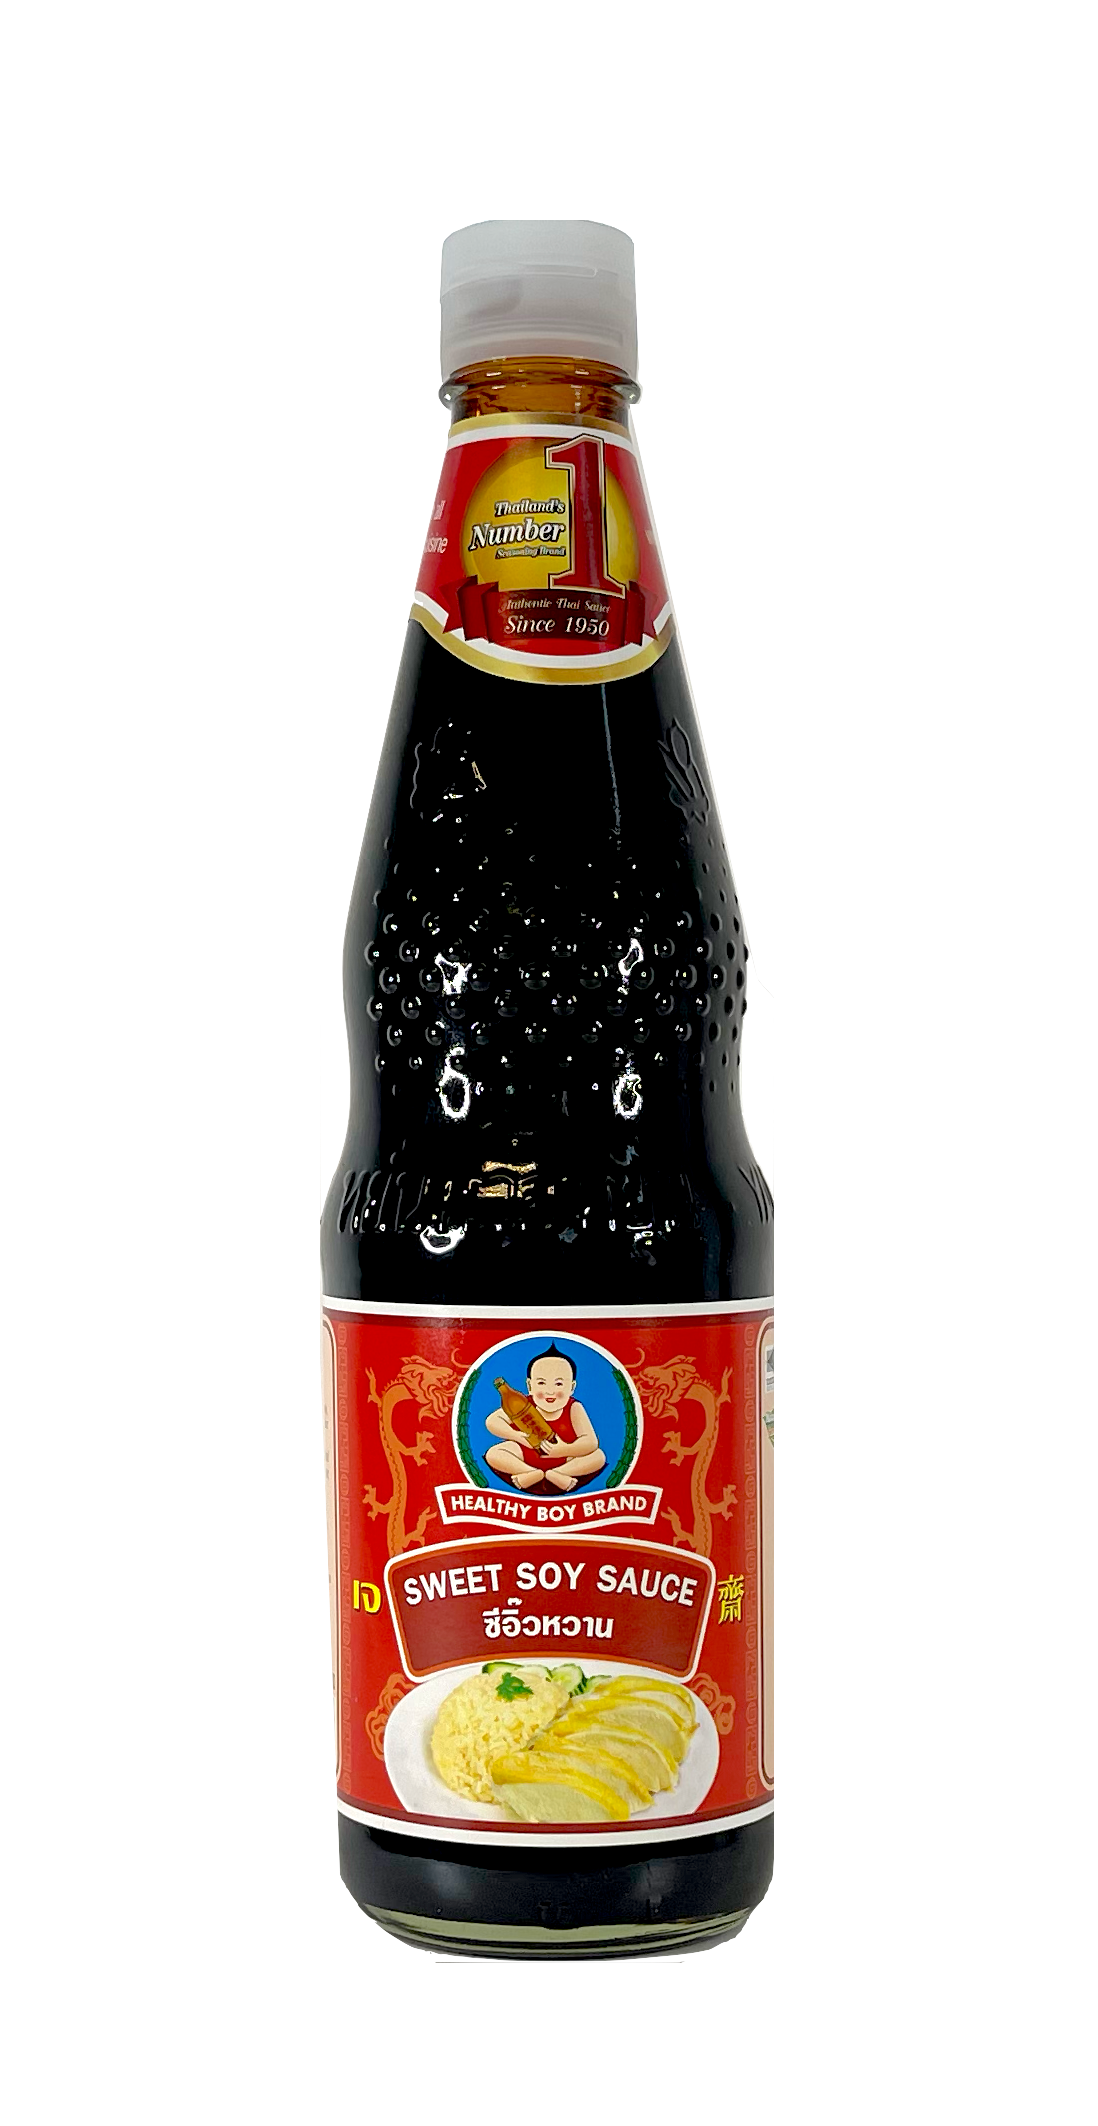 Sweet Soy Sauce Red Bottle 970g Healthy Boy Thailand